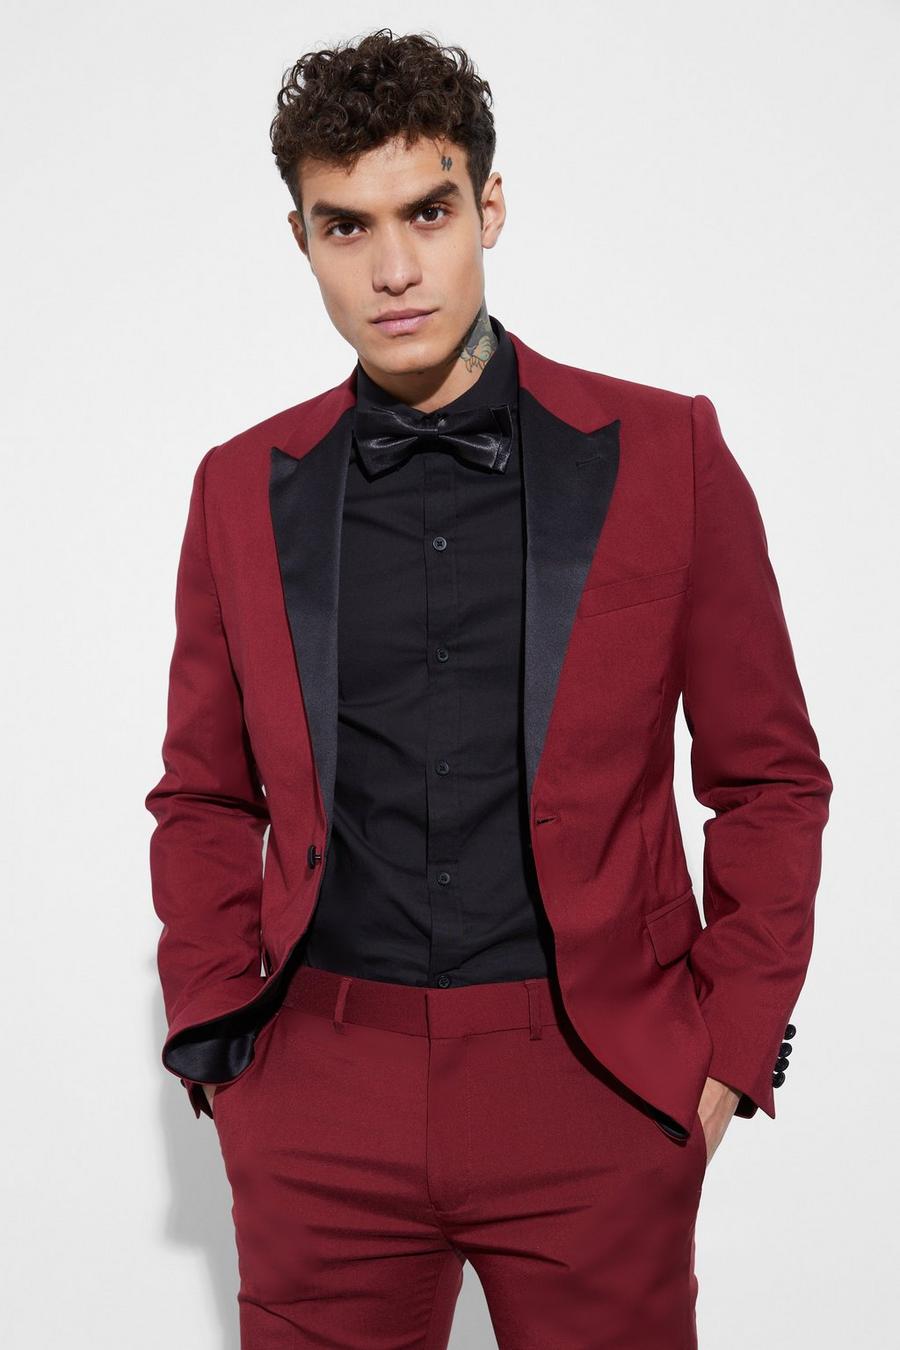 Giacca completo a monopetto Skinny Fit, Burgundy rosso